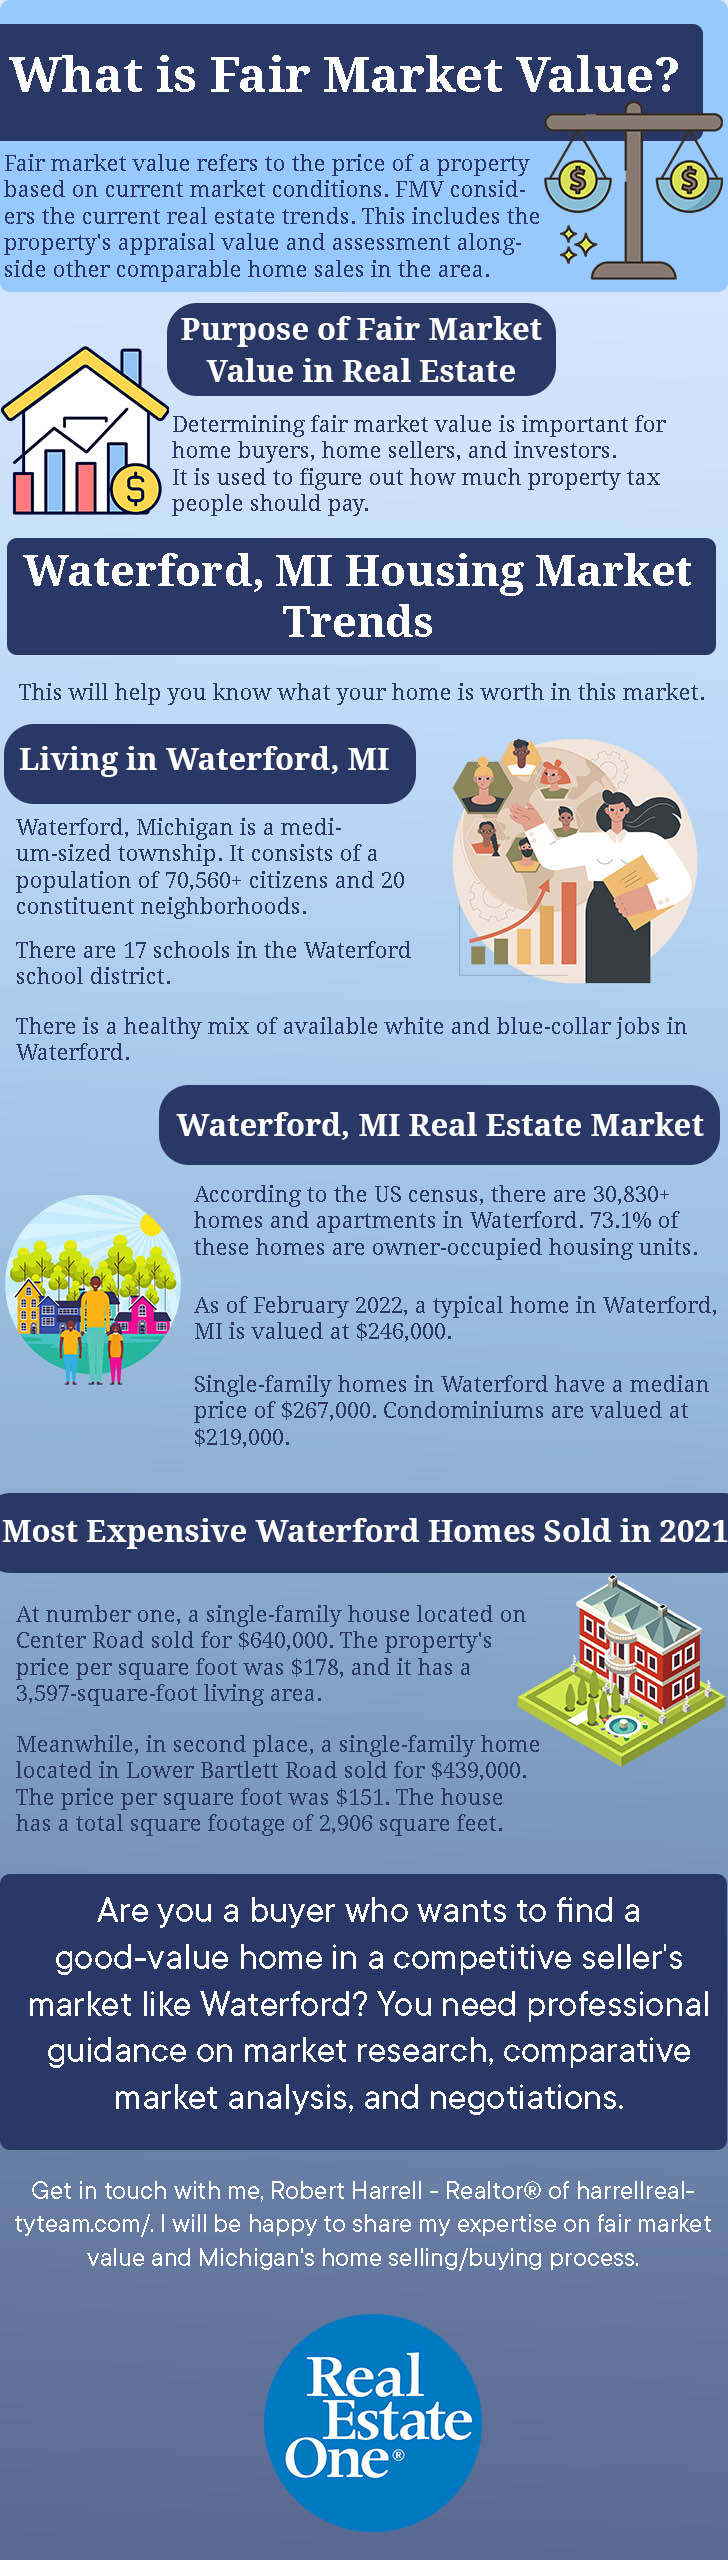 Harrell Realty Team - Get in touch with Robert Harrell - Realtor® of Harrell Realty Team to guide you on the fair market value and Michigan's home selling/buying process